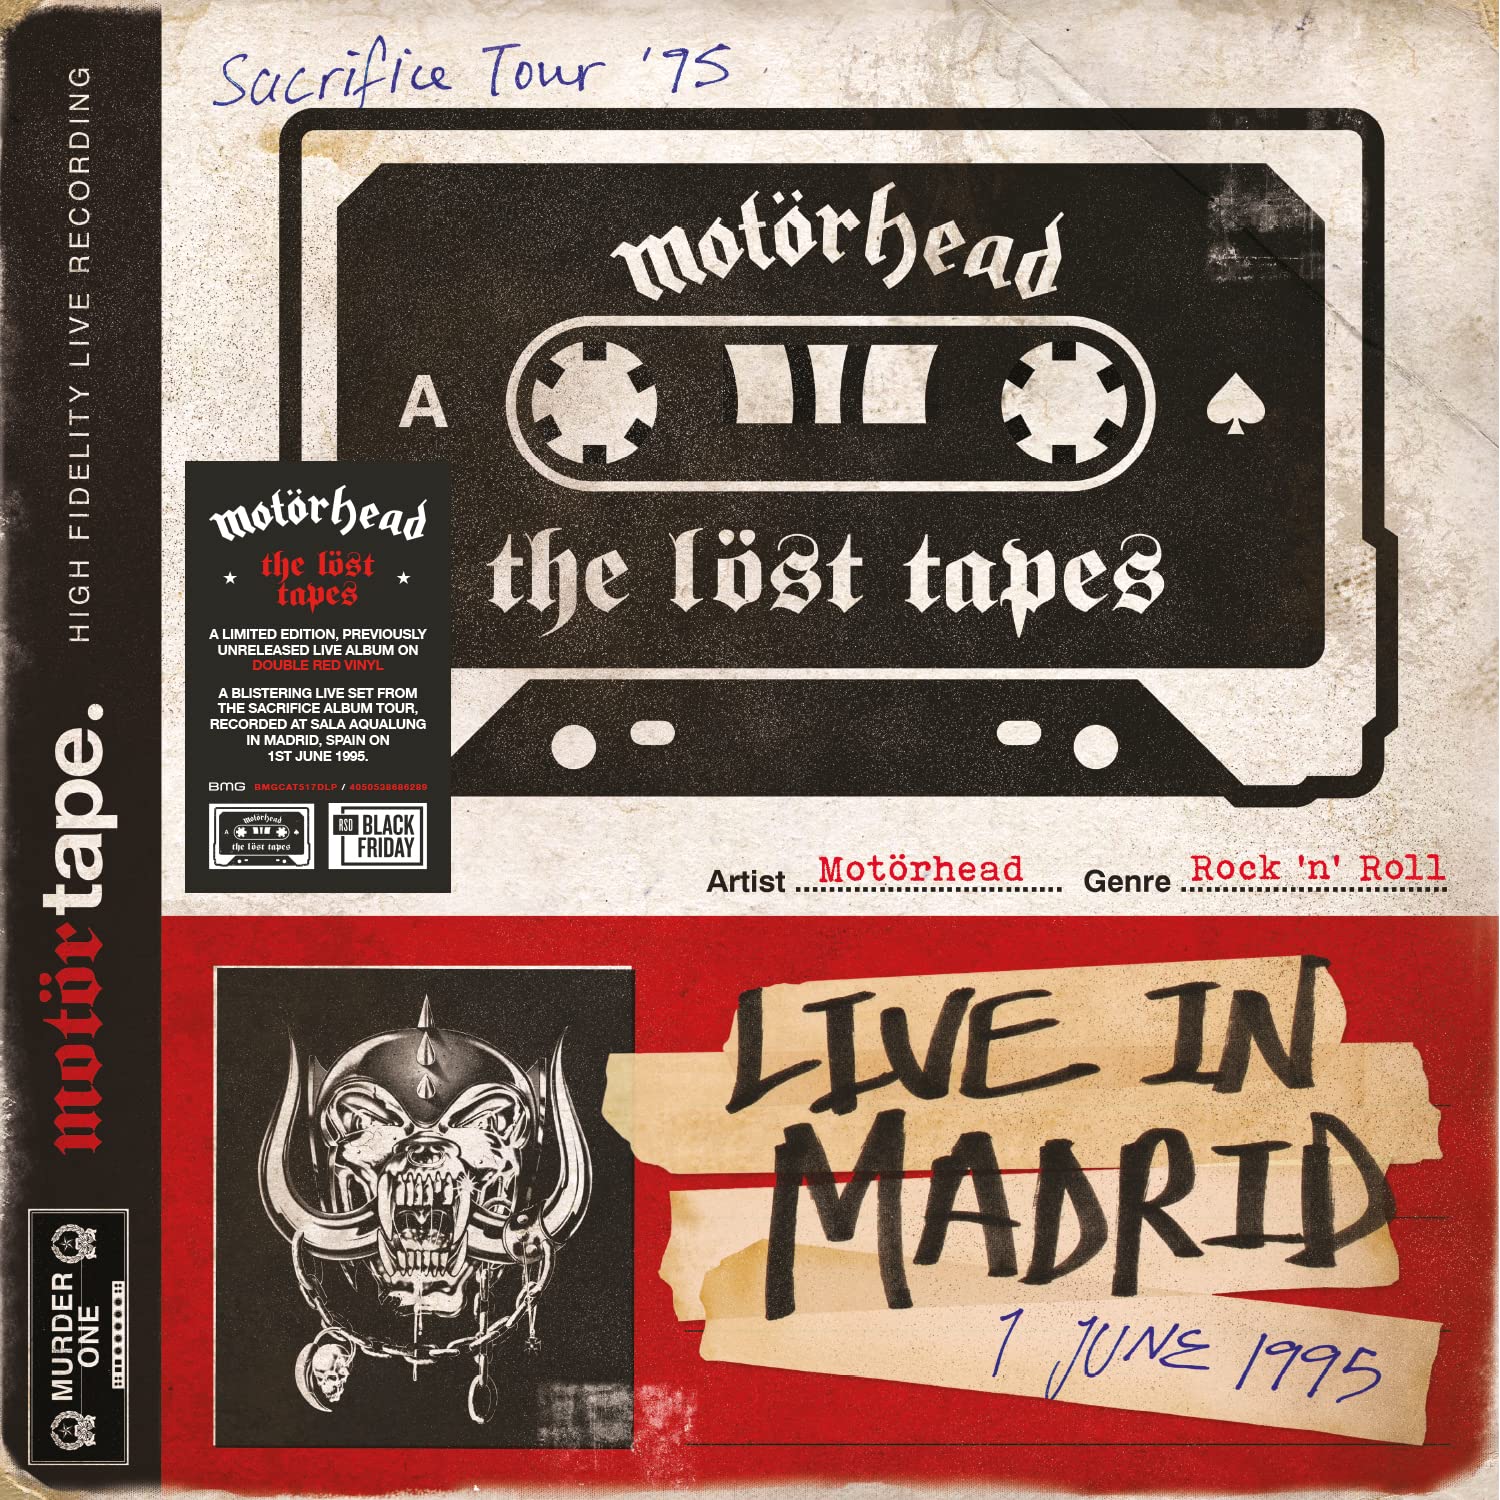 Motorhead - The Lost Tapes, Vol. 1: Live In Madrid, June 1, 1995 LP (RSD 2021 Exclusive, Transparent Red Vinyl)